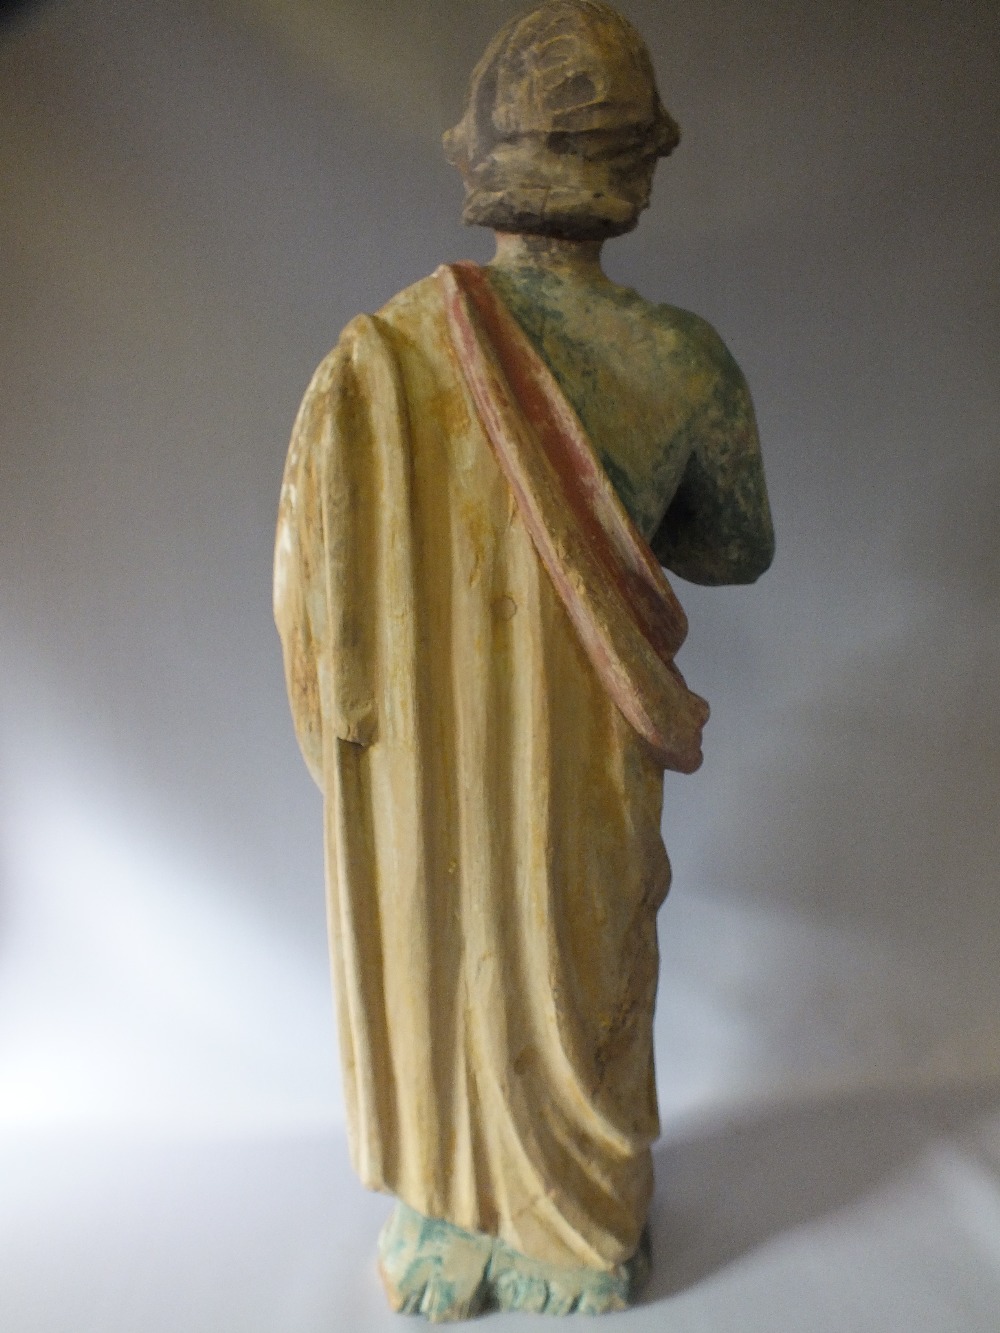 A LARGE EARLY CARVED WOOD RELIGIOUS STATUE DEPICTING A SAINT, with coloured decoration, H 85 cm - Image 4 of 4